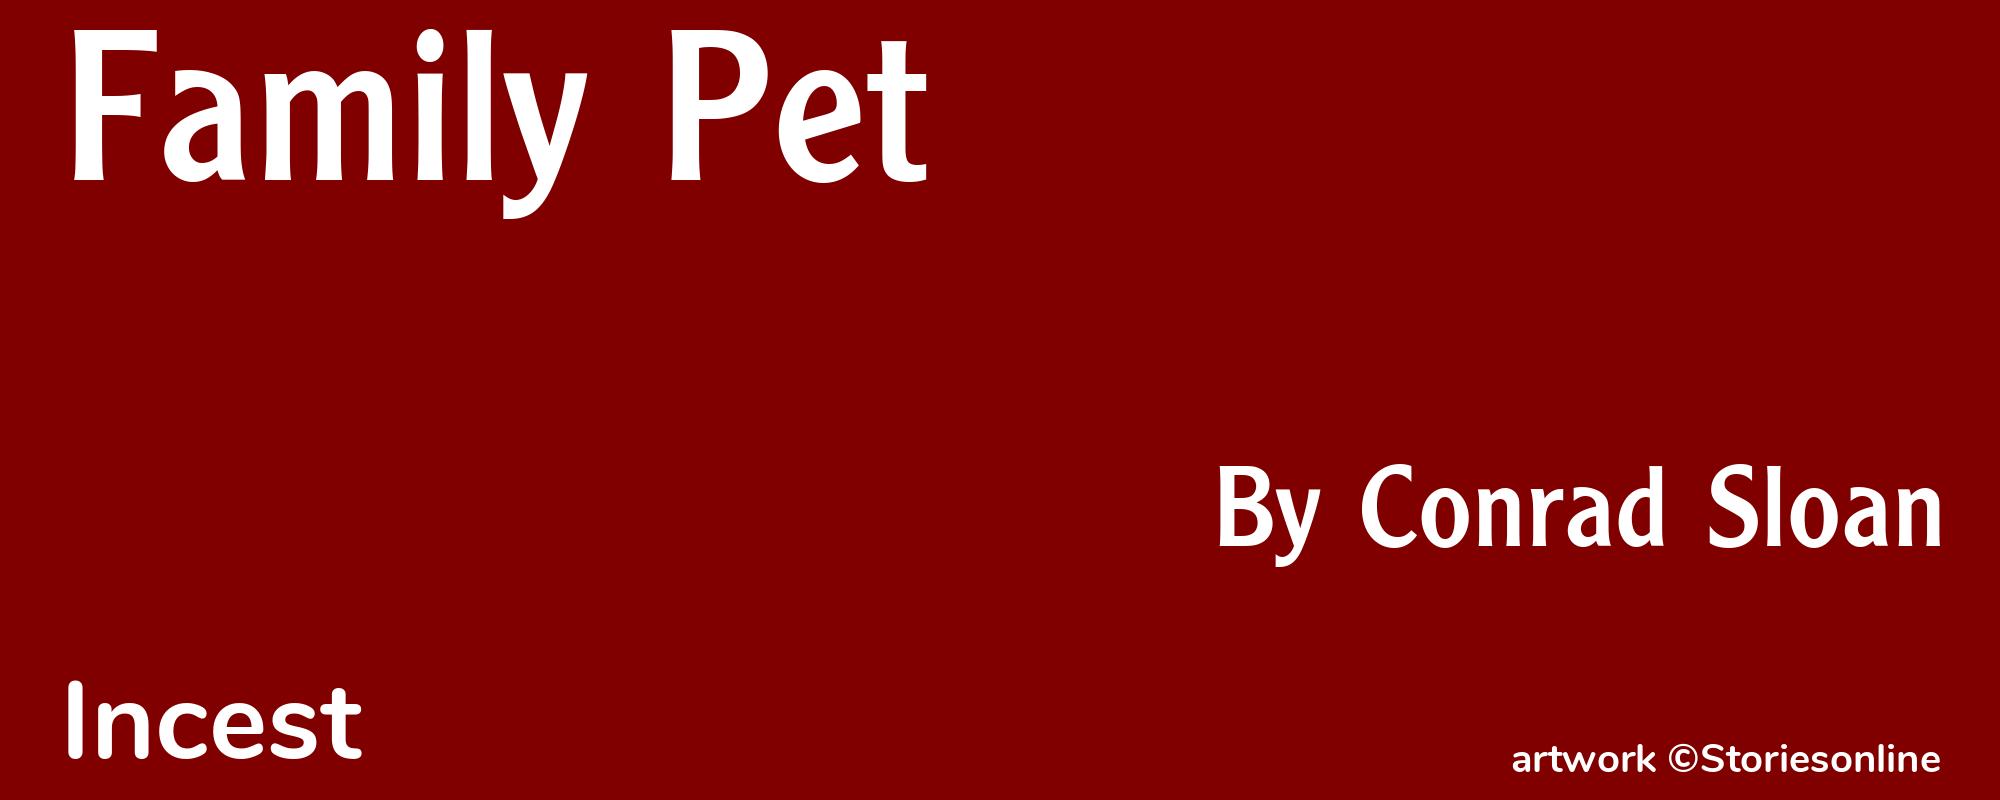 Family Pet - Cover